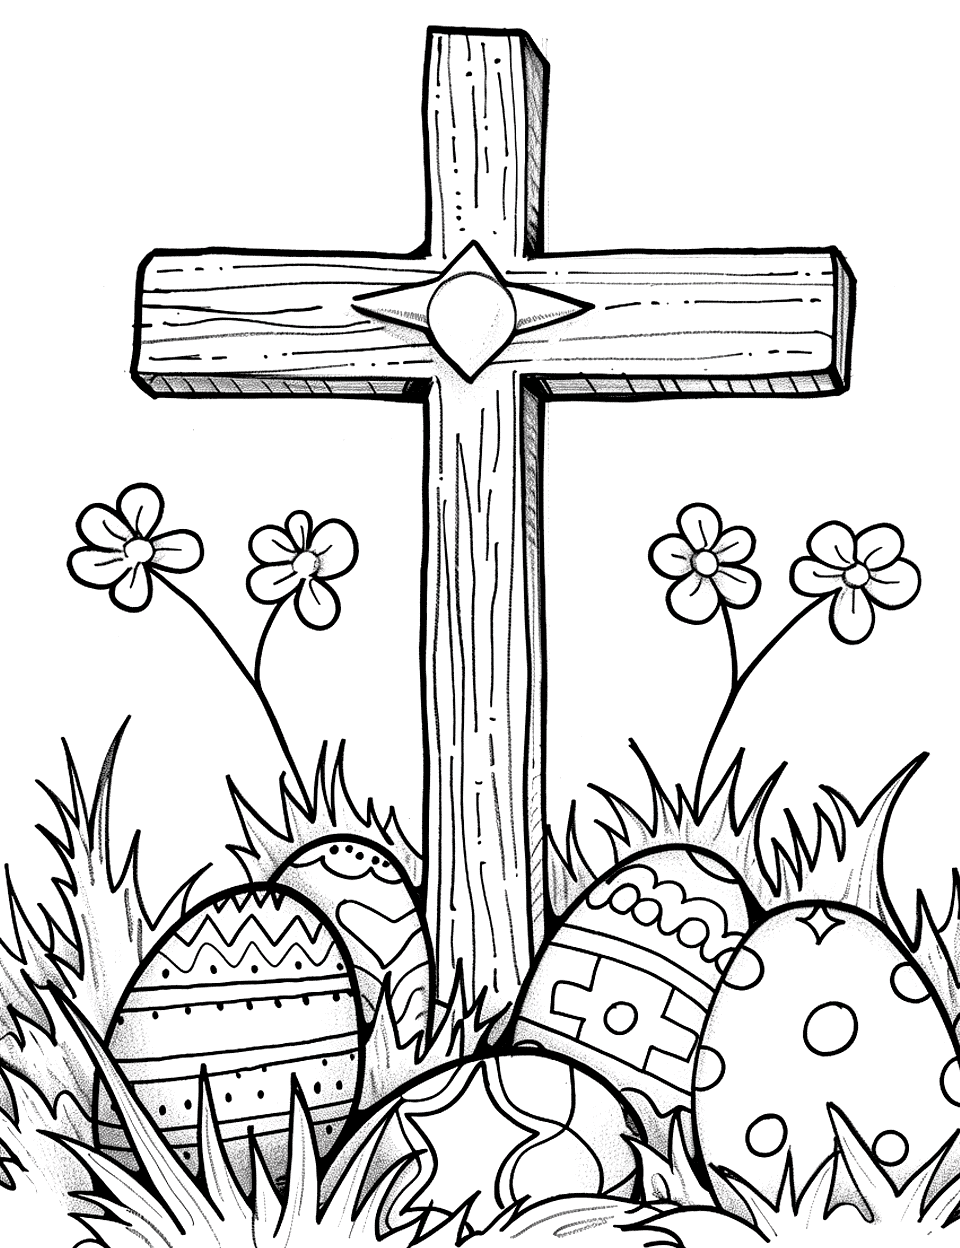 Cross and Easter Eggs Coloring Page - A cross surrounded by decorated Easter eggs in the grass.